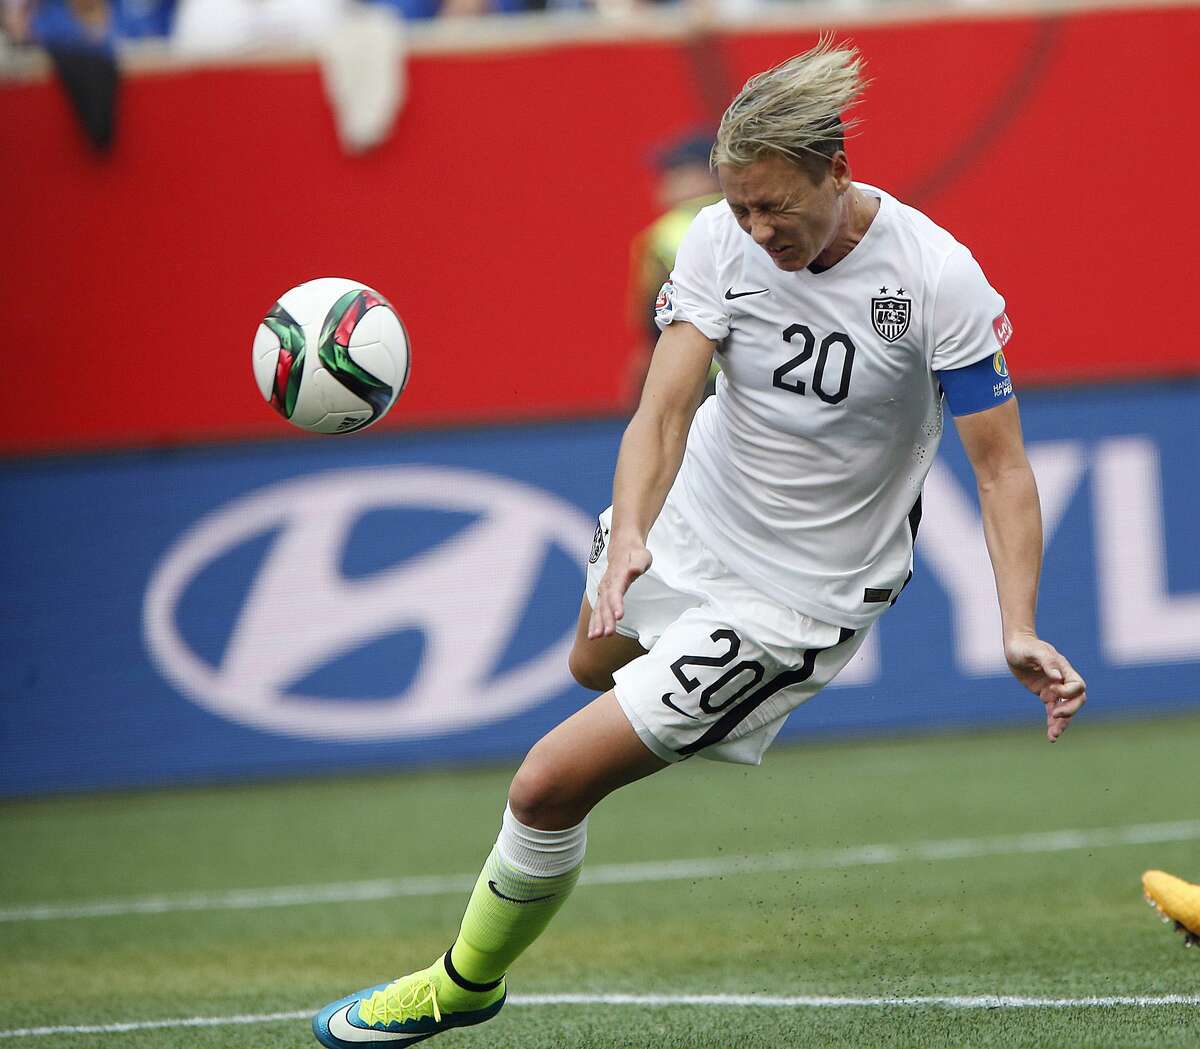 Abby Wambach says she’ll embrace being used as a sub rather than a starter, if it means the U.S. wins.